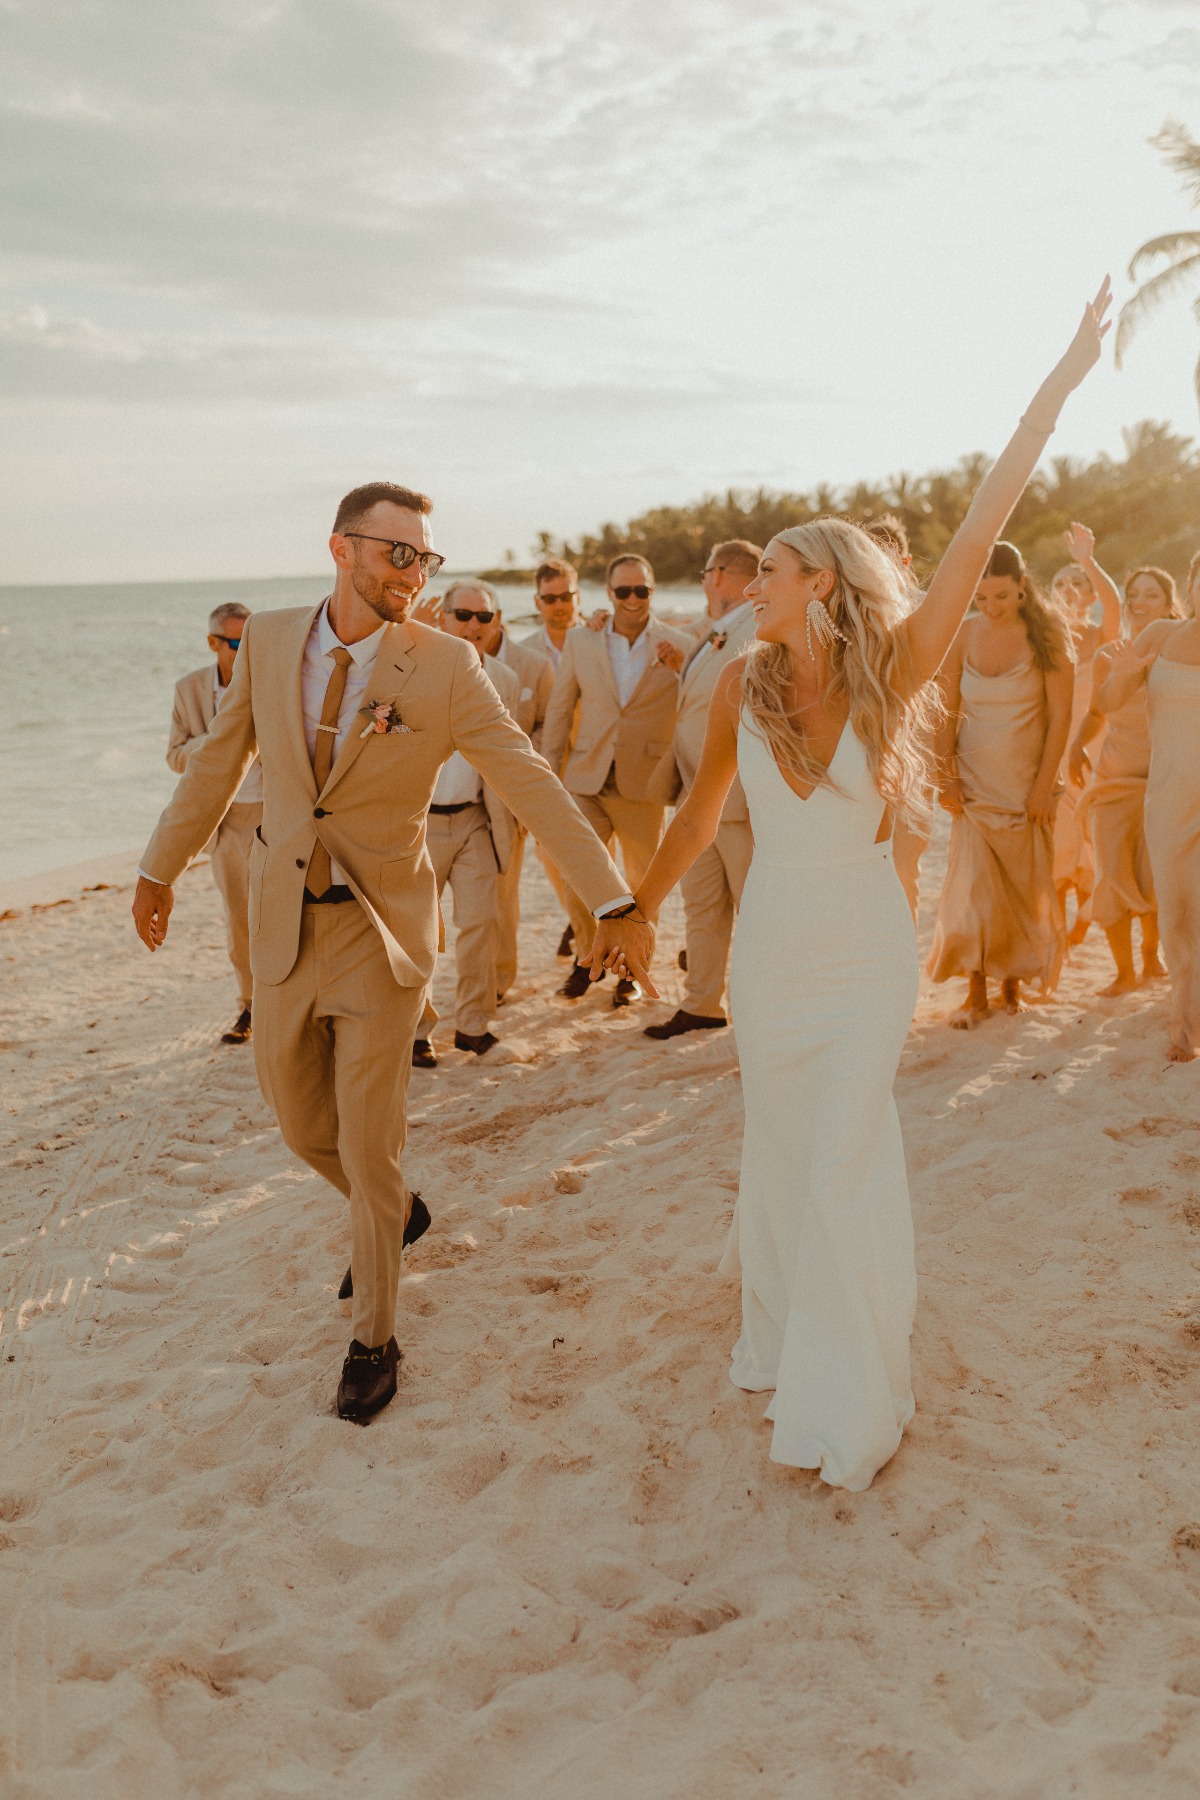 How to get married in Tulum